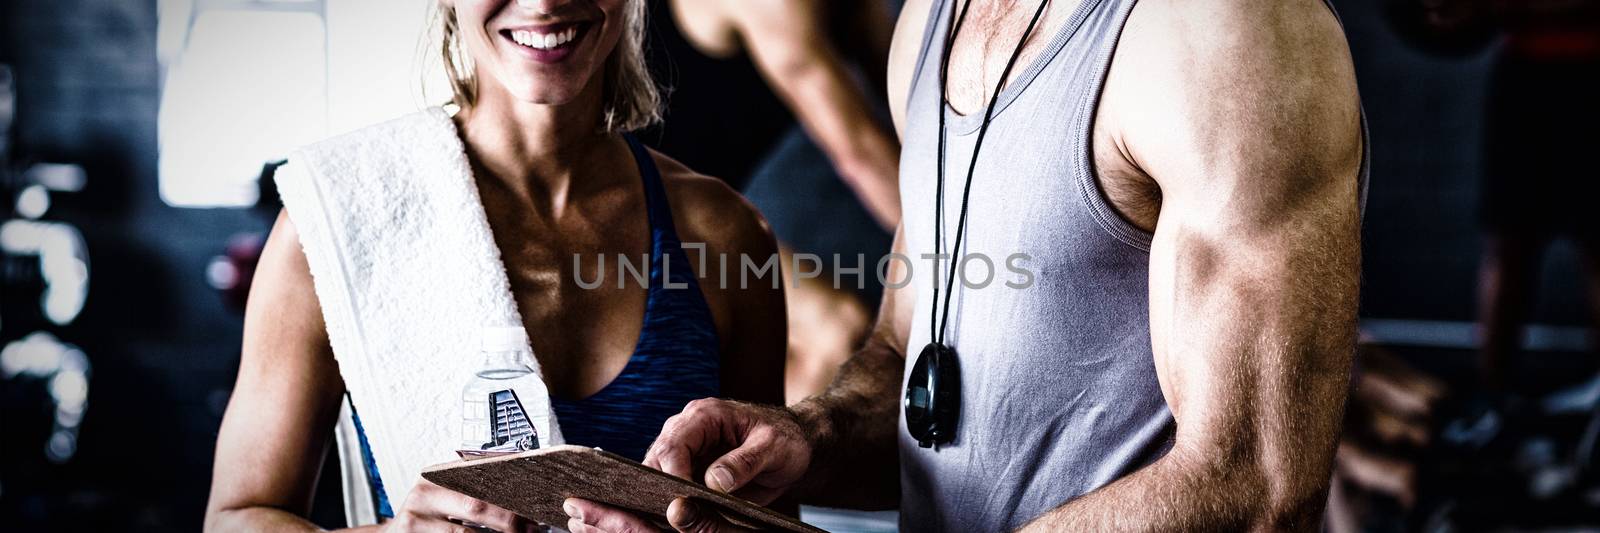 Portrait of smiling fitness instructor with woman standing in gym